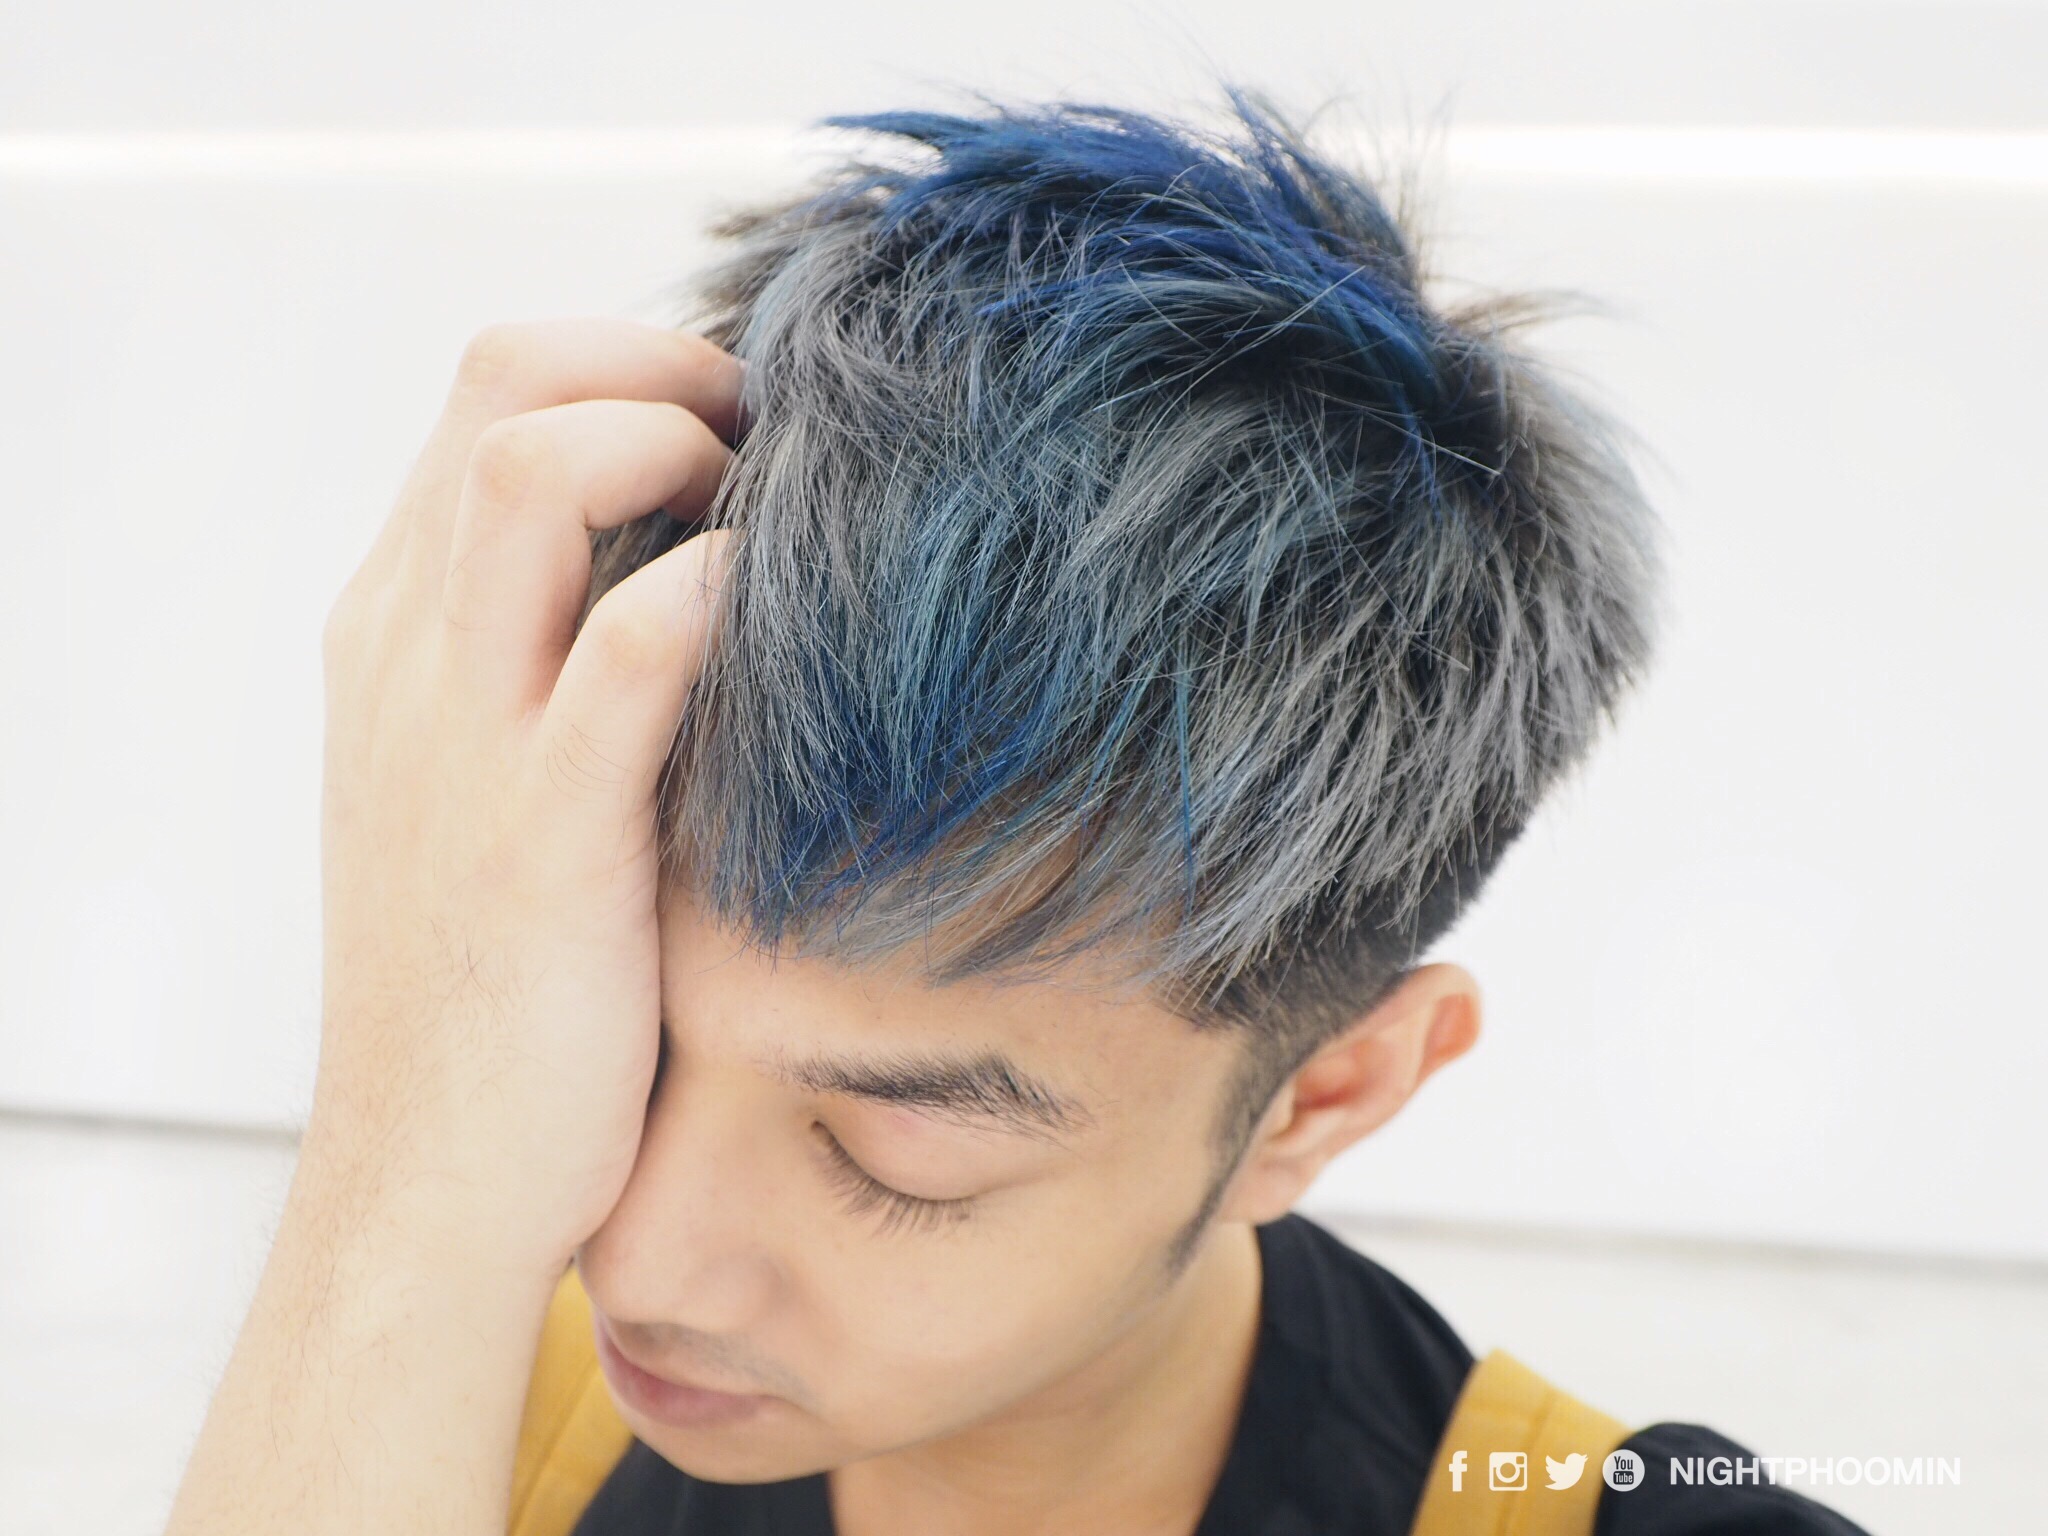 2. "Blue and silver hair on Asian men" - wide 7